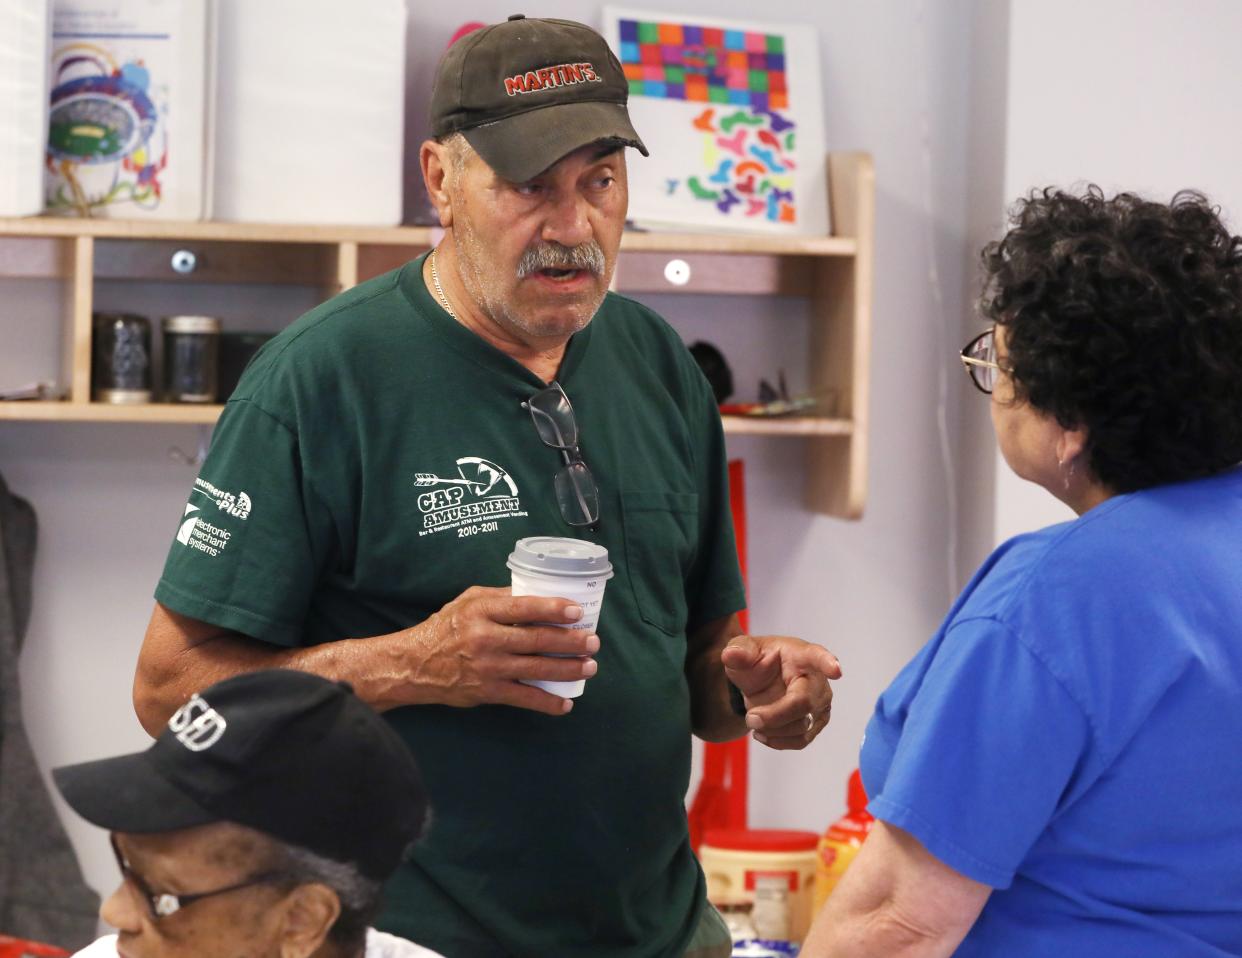 Martin Pedraza talks with Nancy Maciuska during a meeting of the Fairy Grandparents group at the Lewis Street YMCA Neighborhood Center.